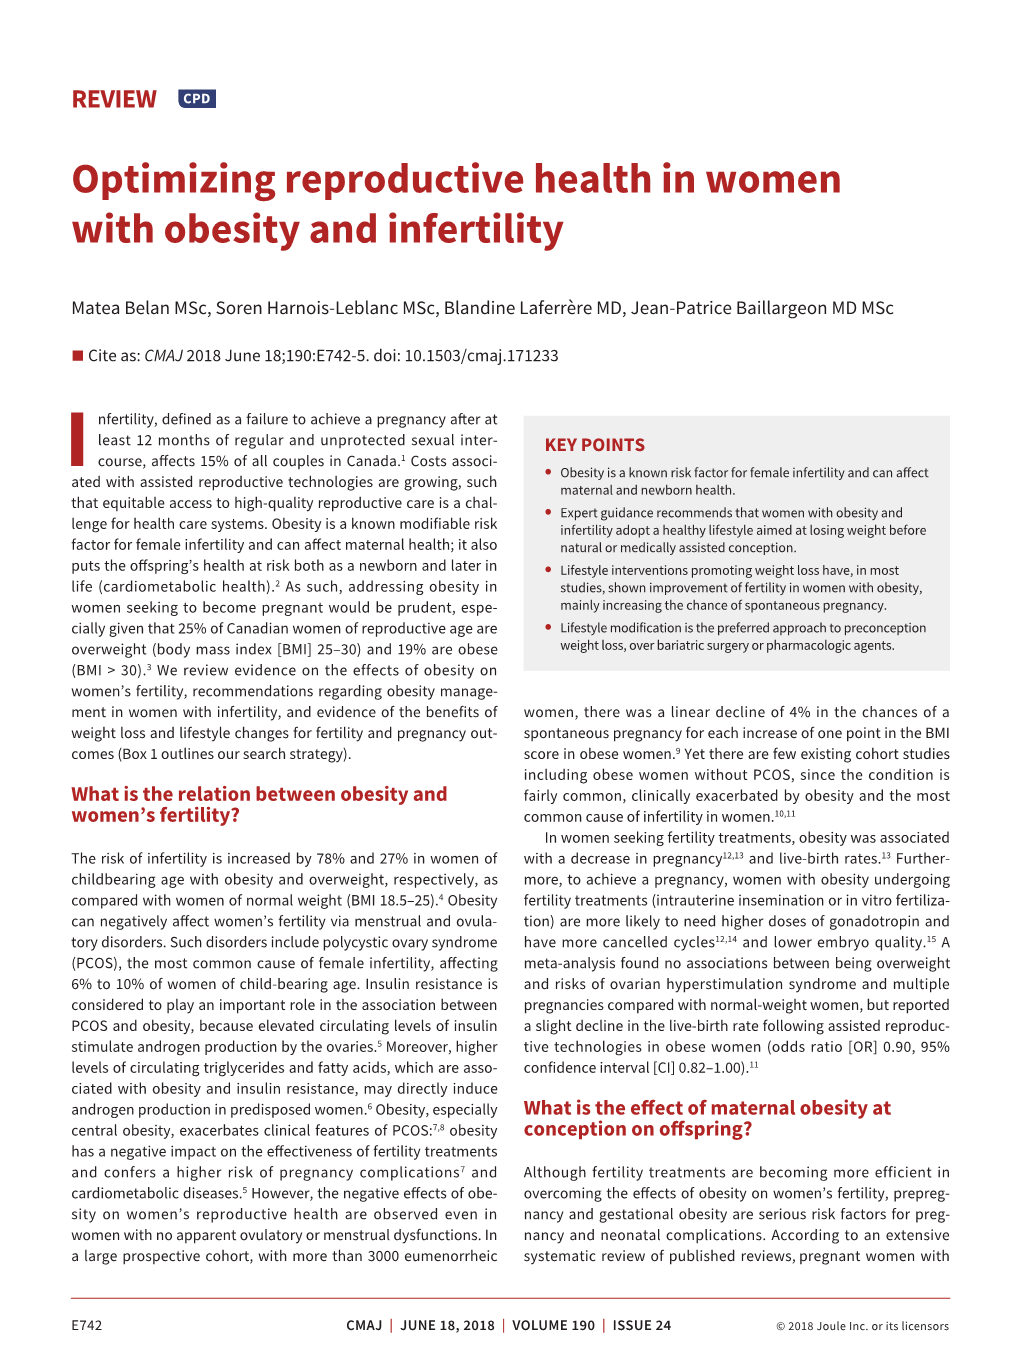 Optimizing Reproductive Health in Women with Obesity and Infertility